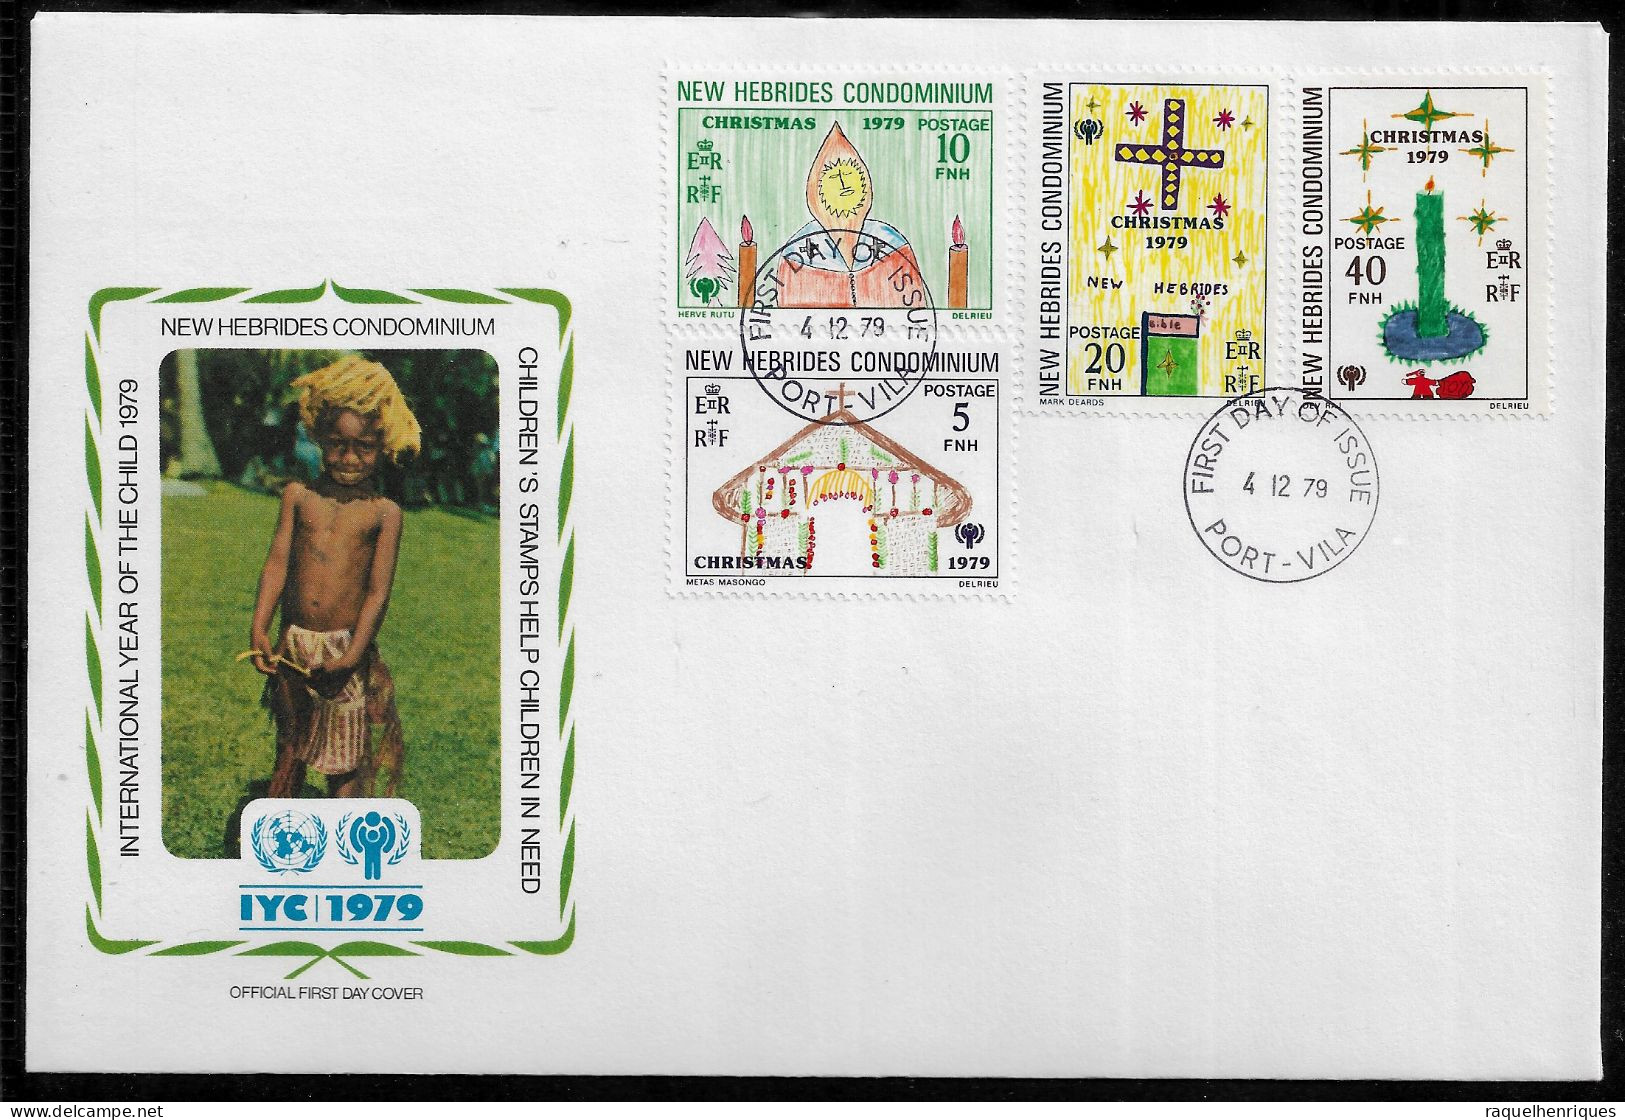 NEW HEBRIDES FDC COVER - 1979 International Year Of The Child ENGLISH SET FDC (FDC79#04) - Briefe U. Dokumente